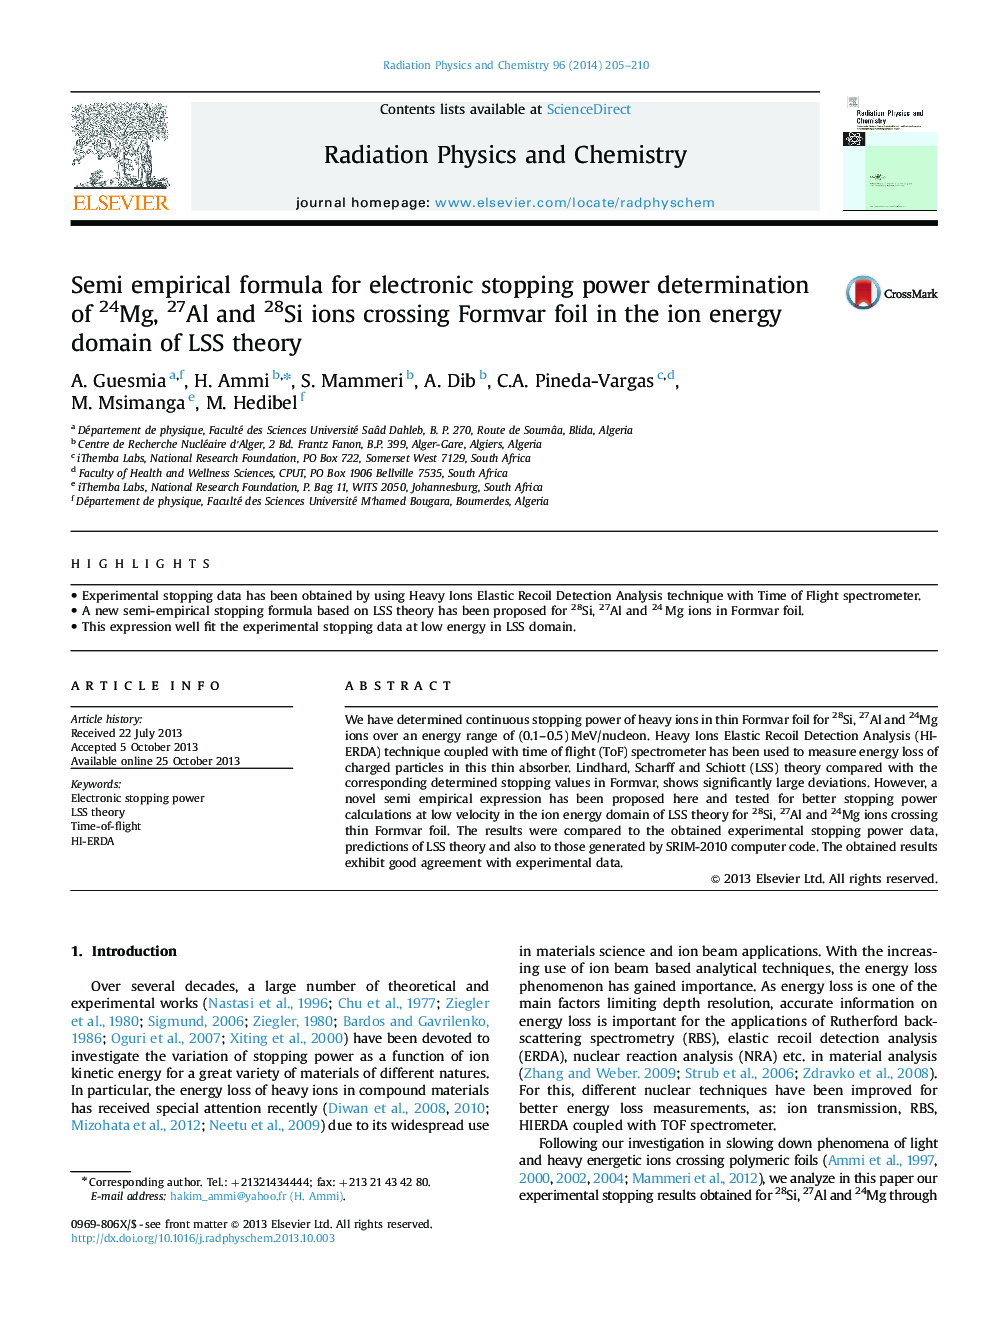 Semi empirical formula for electronic stopping power determination of 24Mg, 27Al and 28Si ions crossing Formvar foil in the ion energy domain of LSS theory